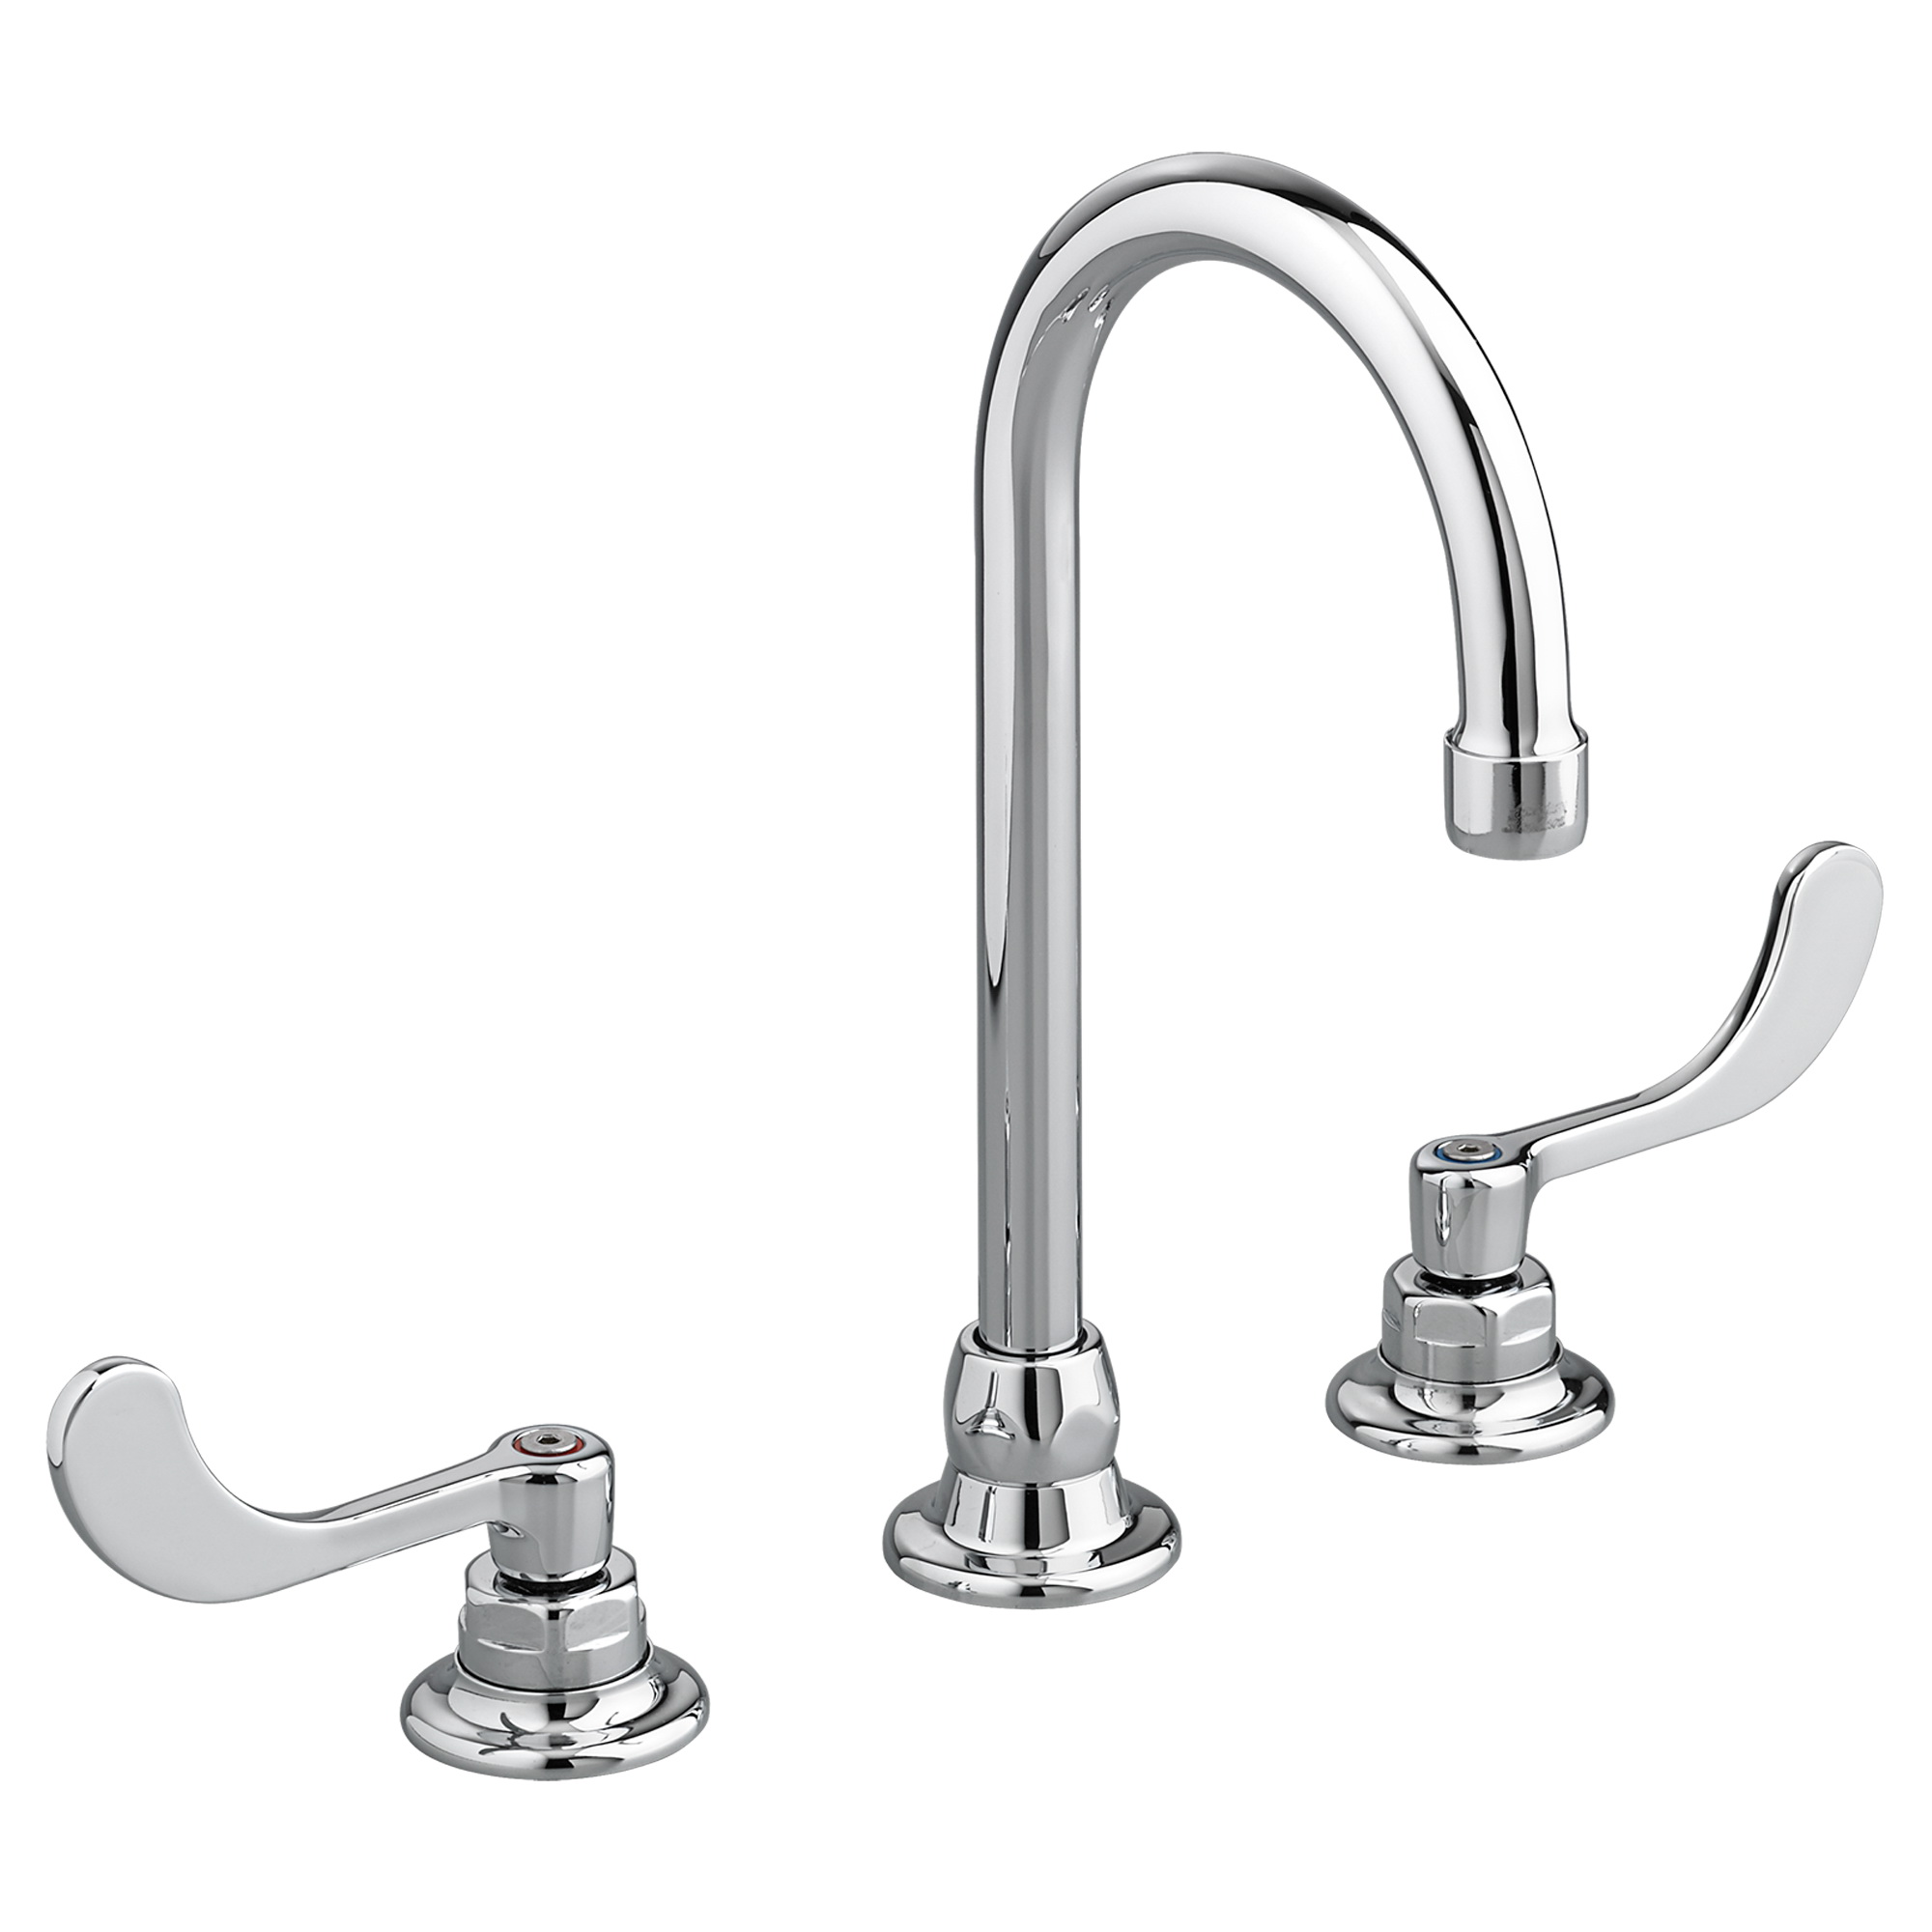 American Standard Monterrey™ 6540.170.002 Polished Chrome Cast Brass Lavatory Faucet, 1/2 in, NPSM